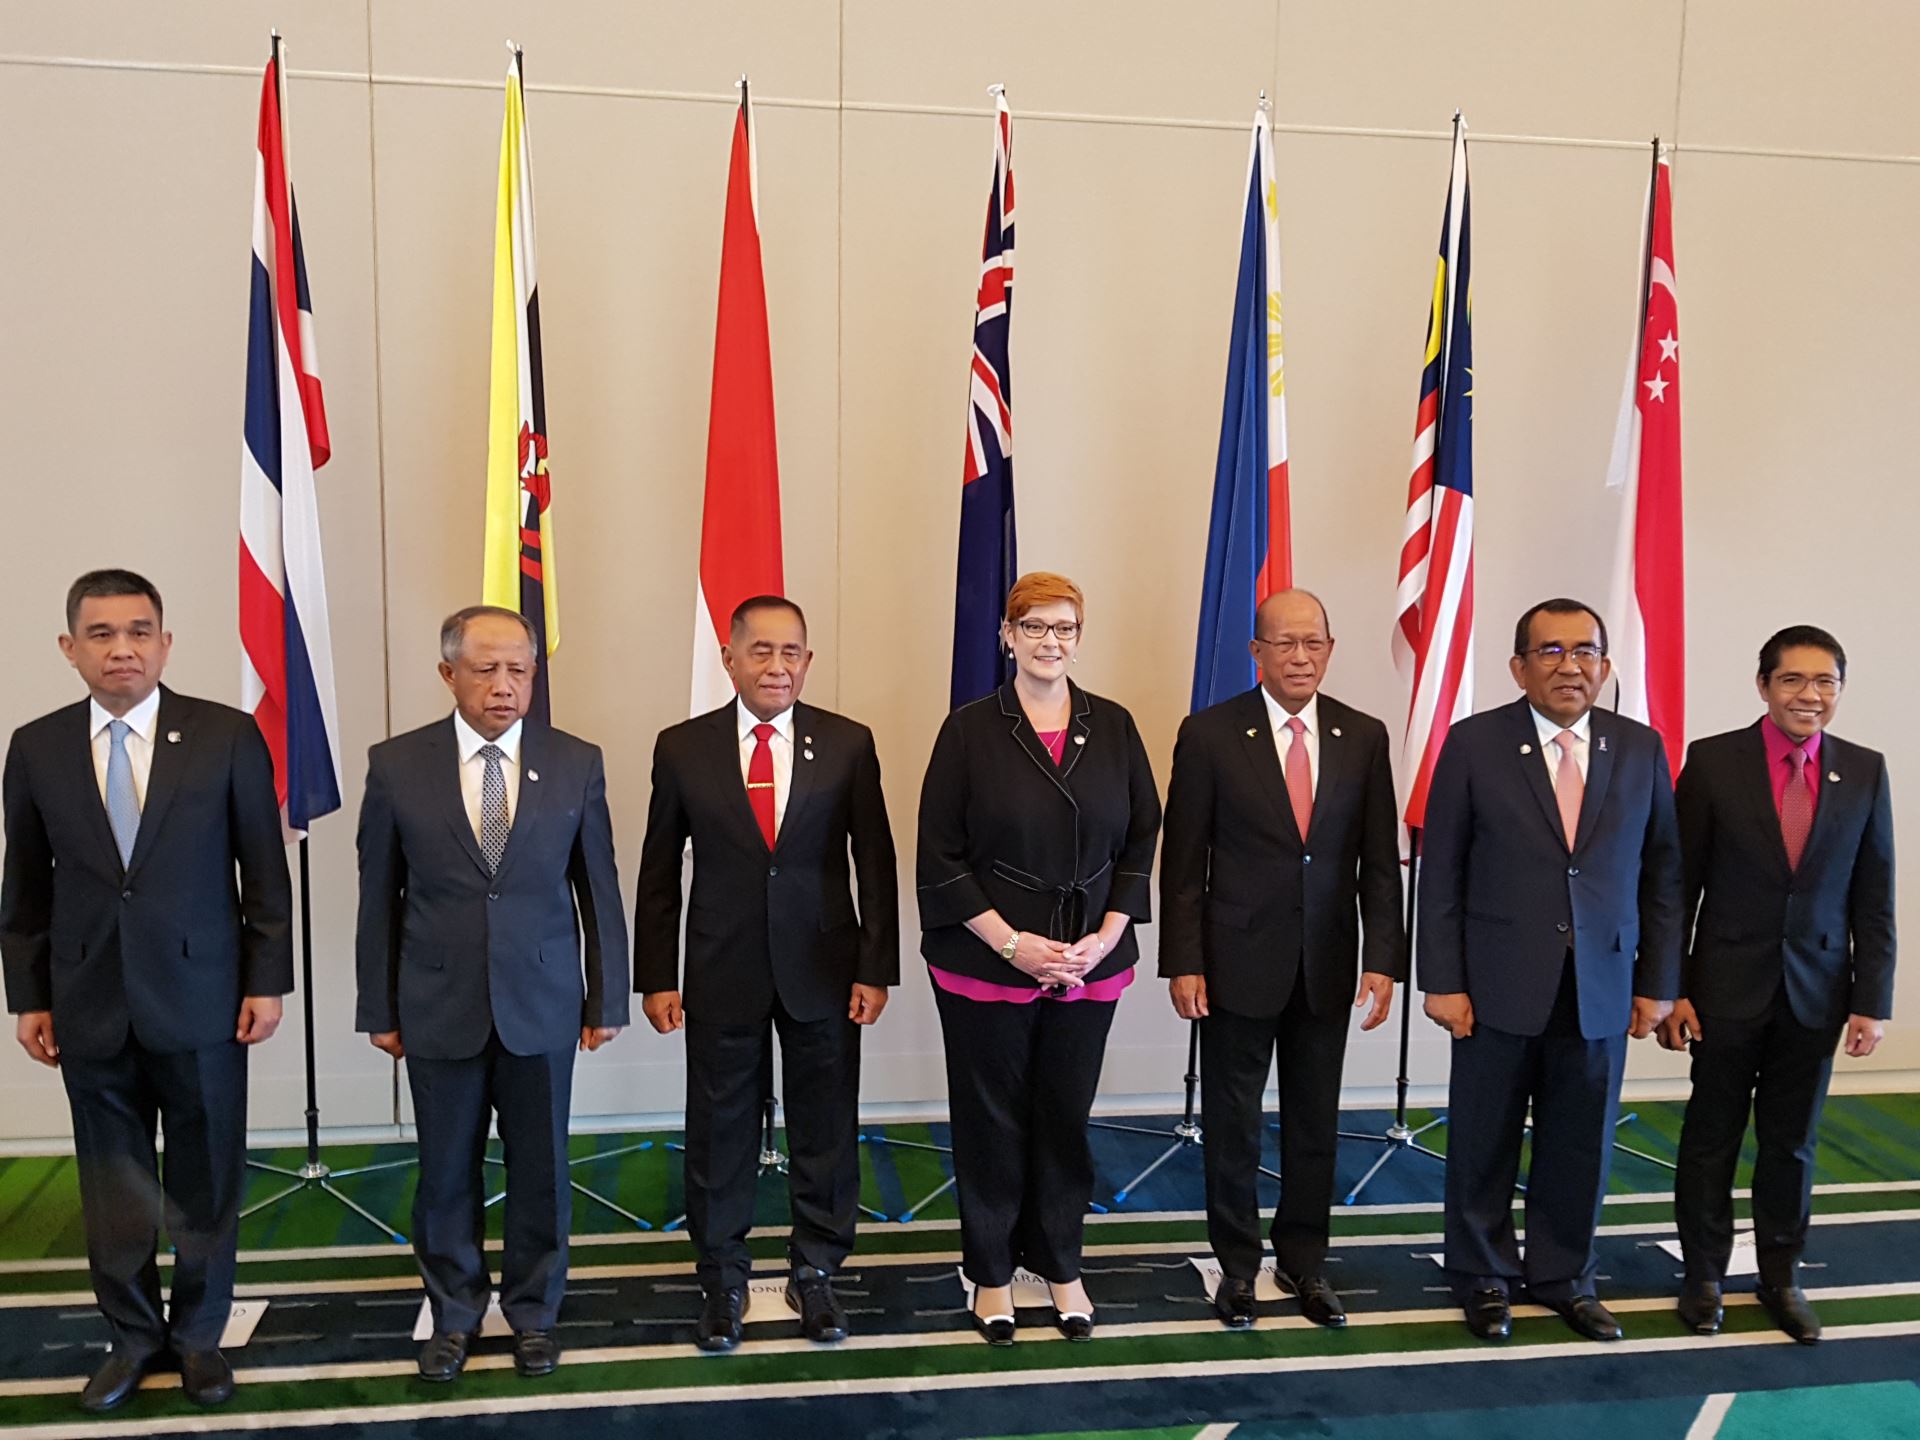 Senior Minister of State for Defence Dr Mohamad Maliki Bin Osman (far right) with the other defence ministers participating in the Sub-Regional Defence Ministers' Meeting: The Perth Meeting.